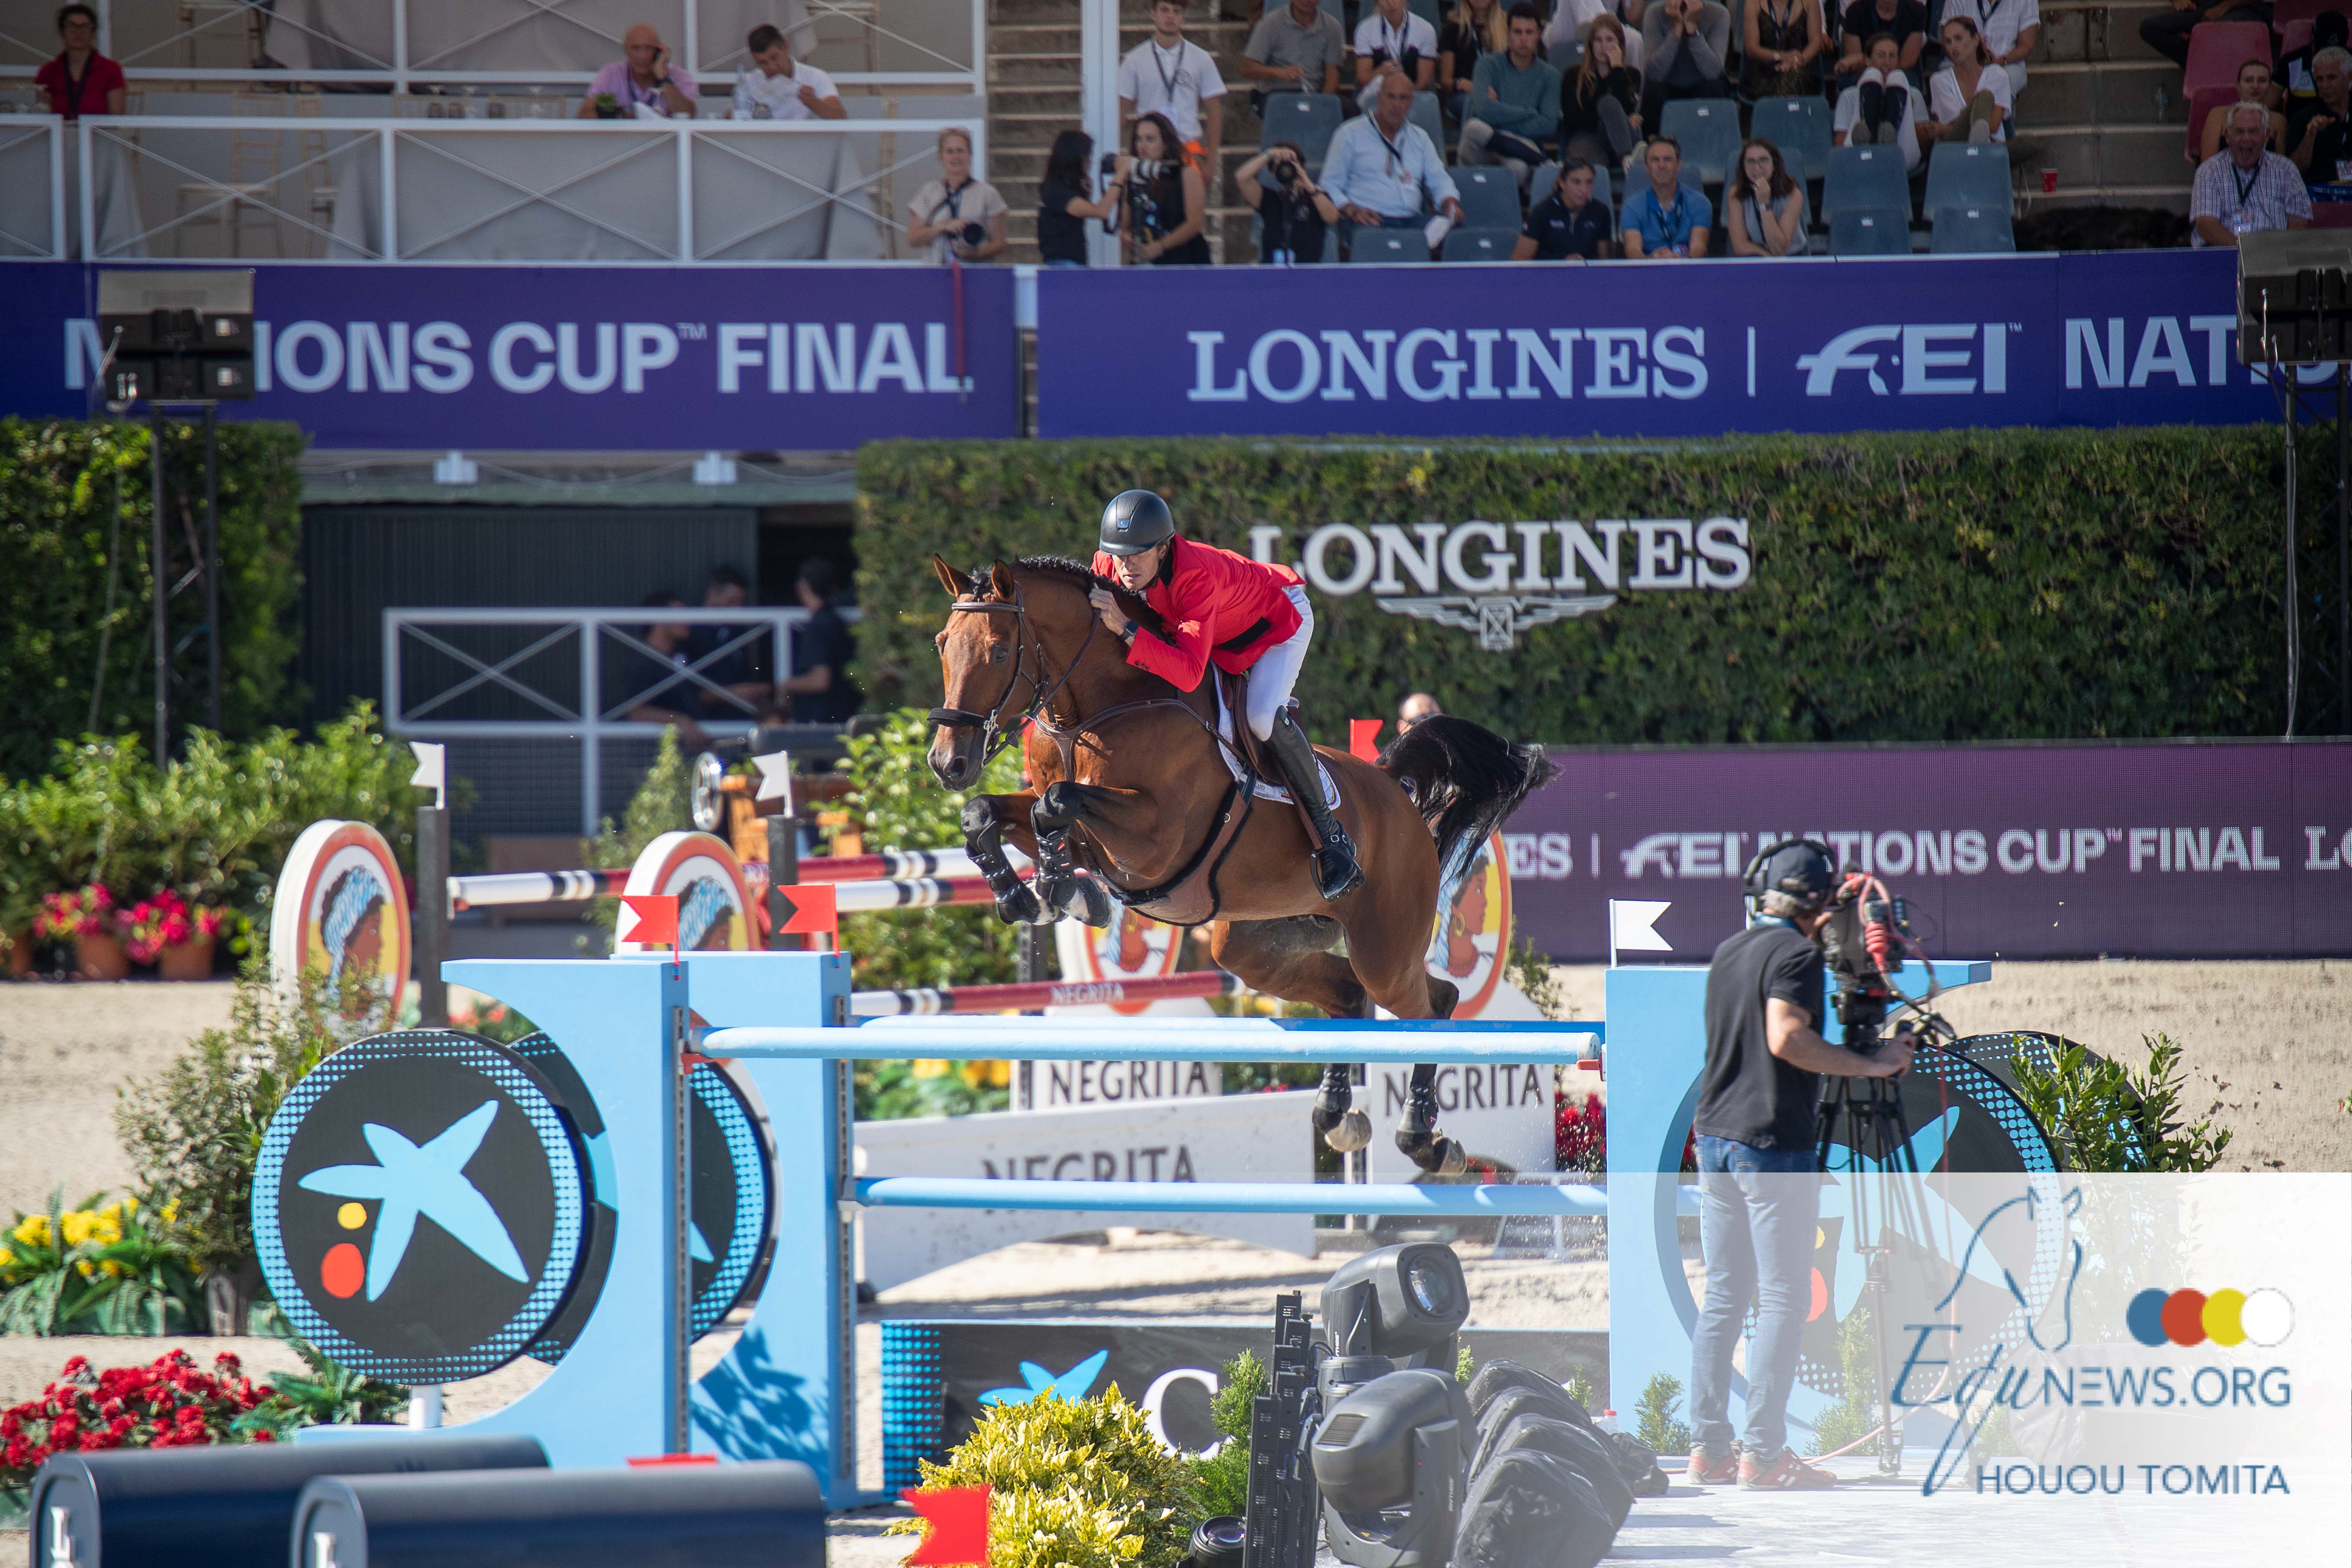 Teams for the Longines League of Nations in Abu Dhabi announced